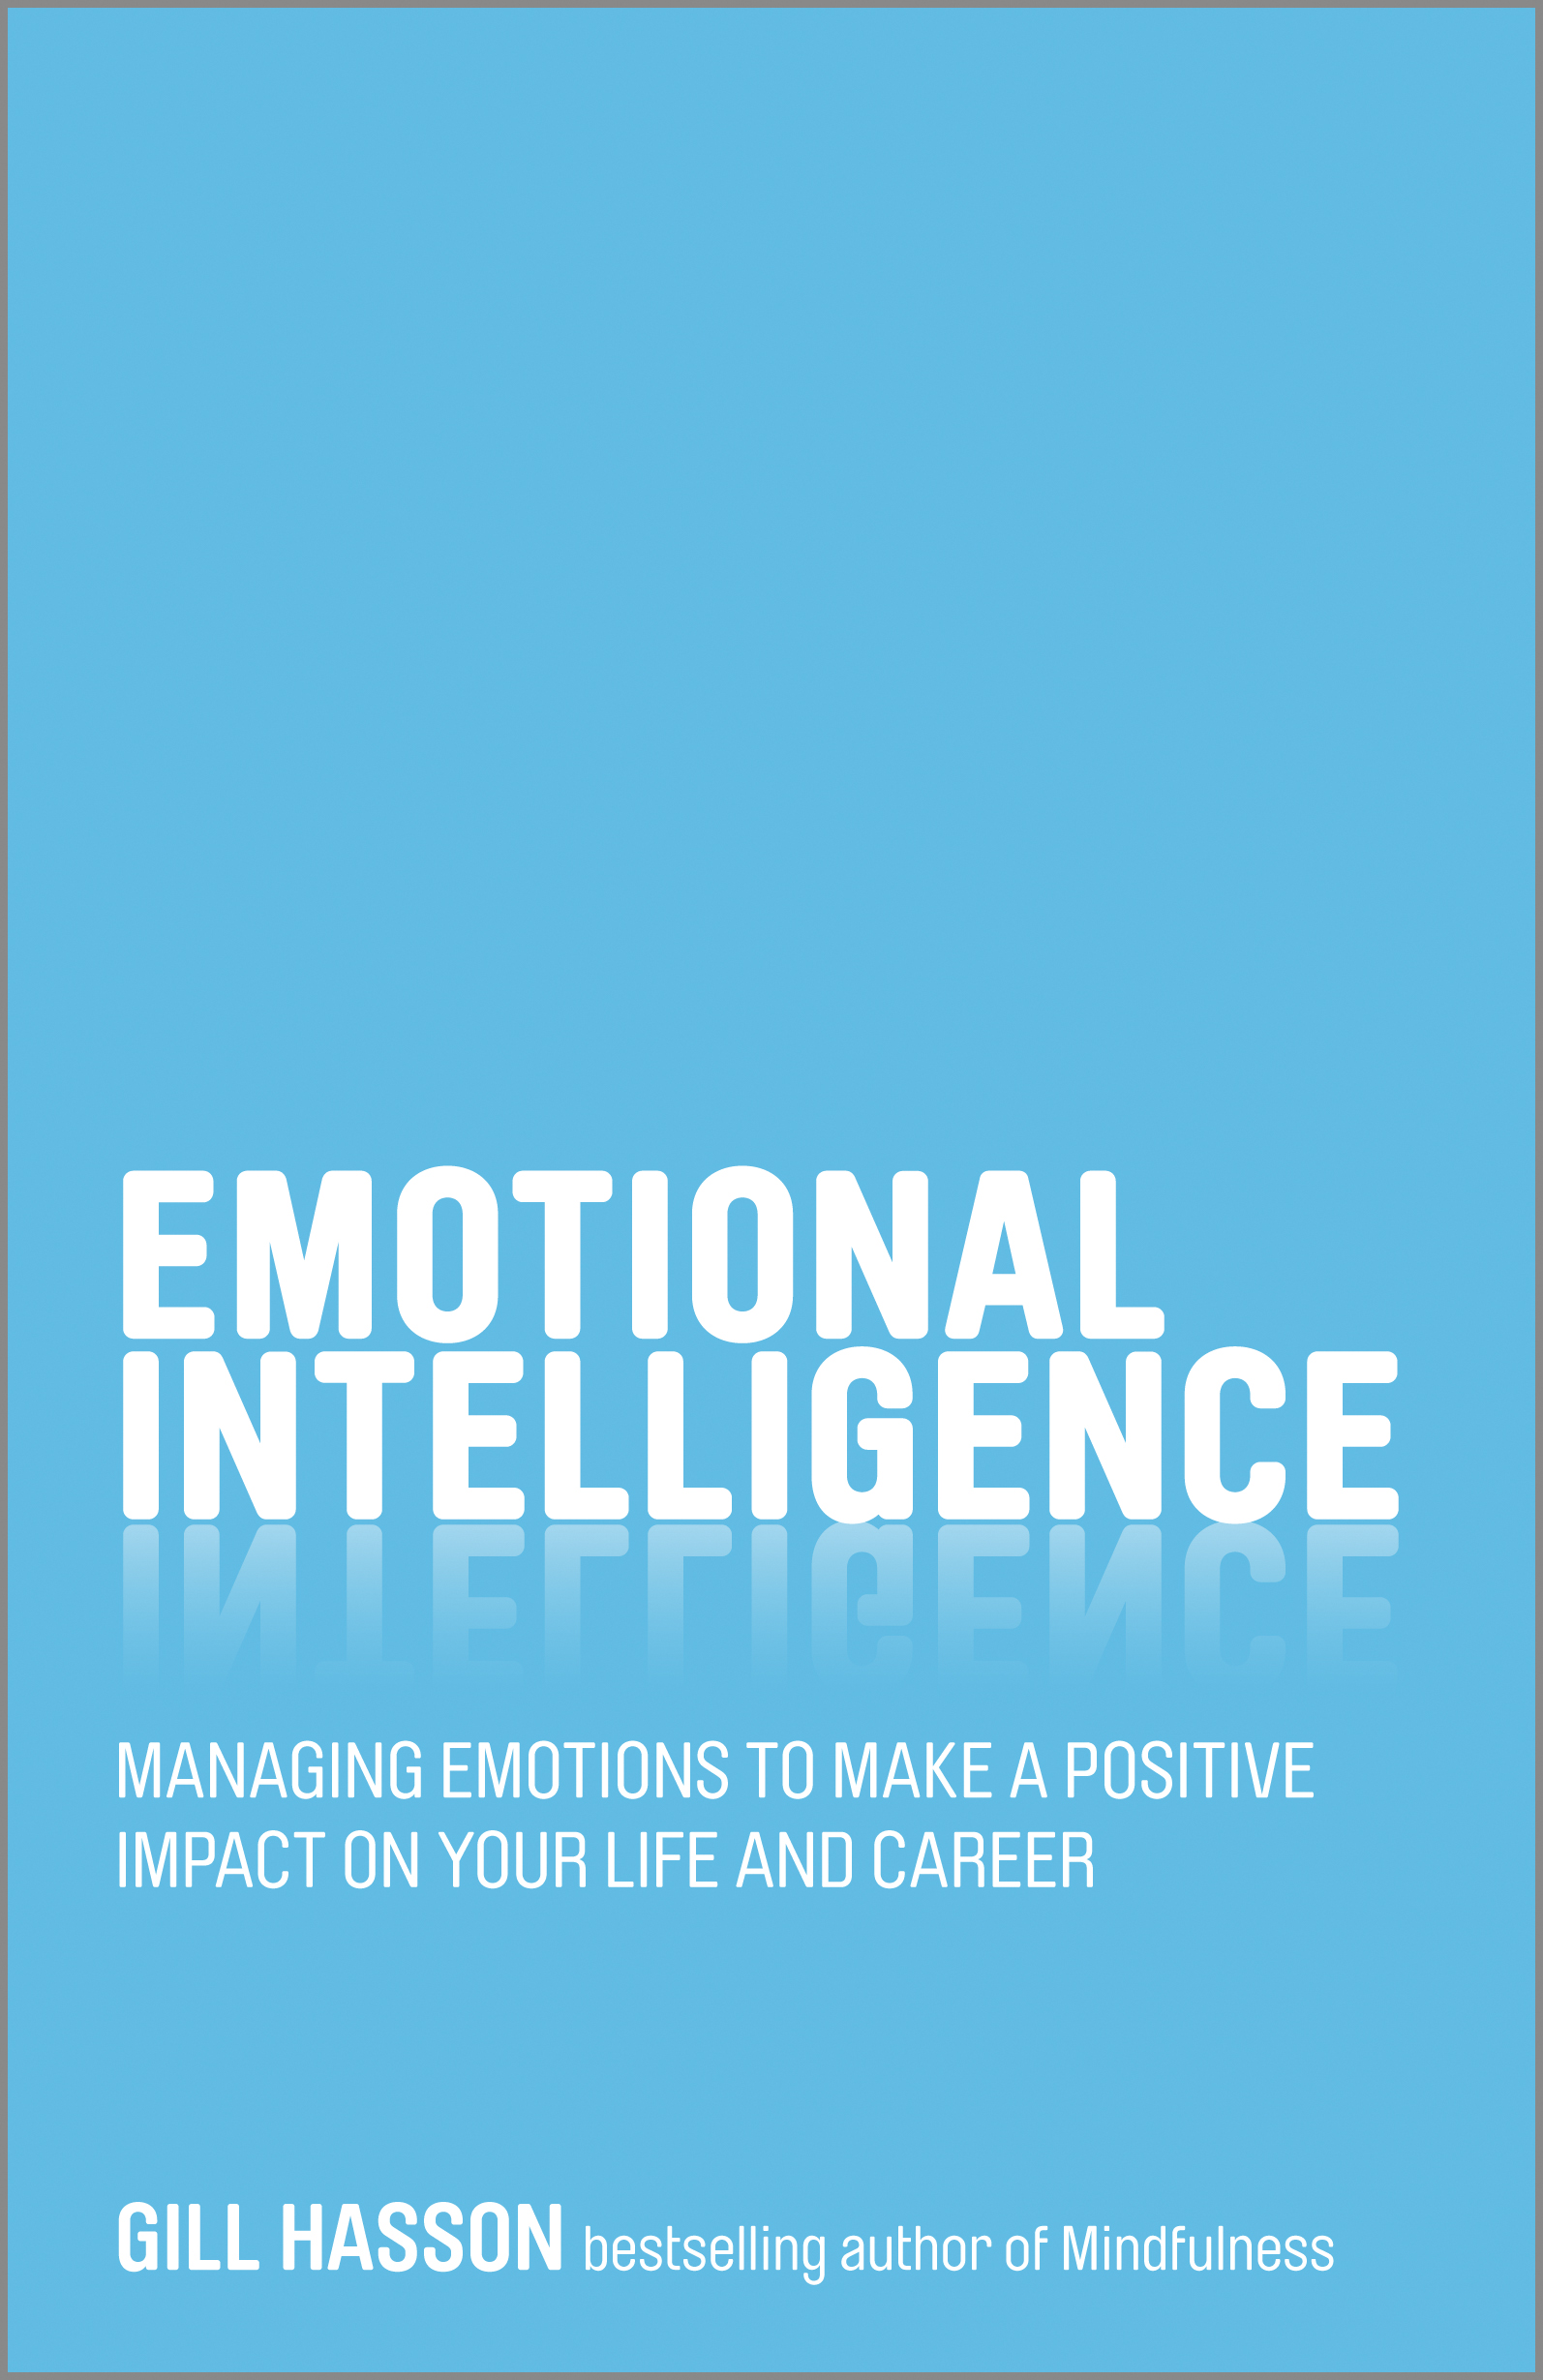 Emotional-Intelligence--Managing-Emotions-to-Make-a-Positive-Impact-on-Your-Life-and-Career